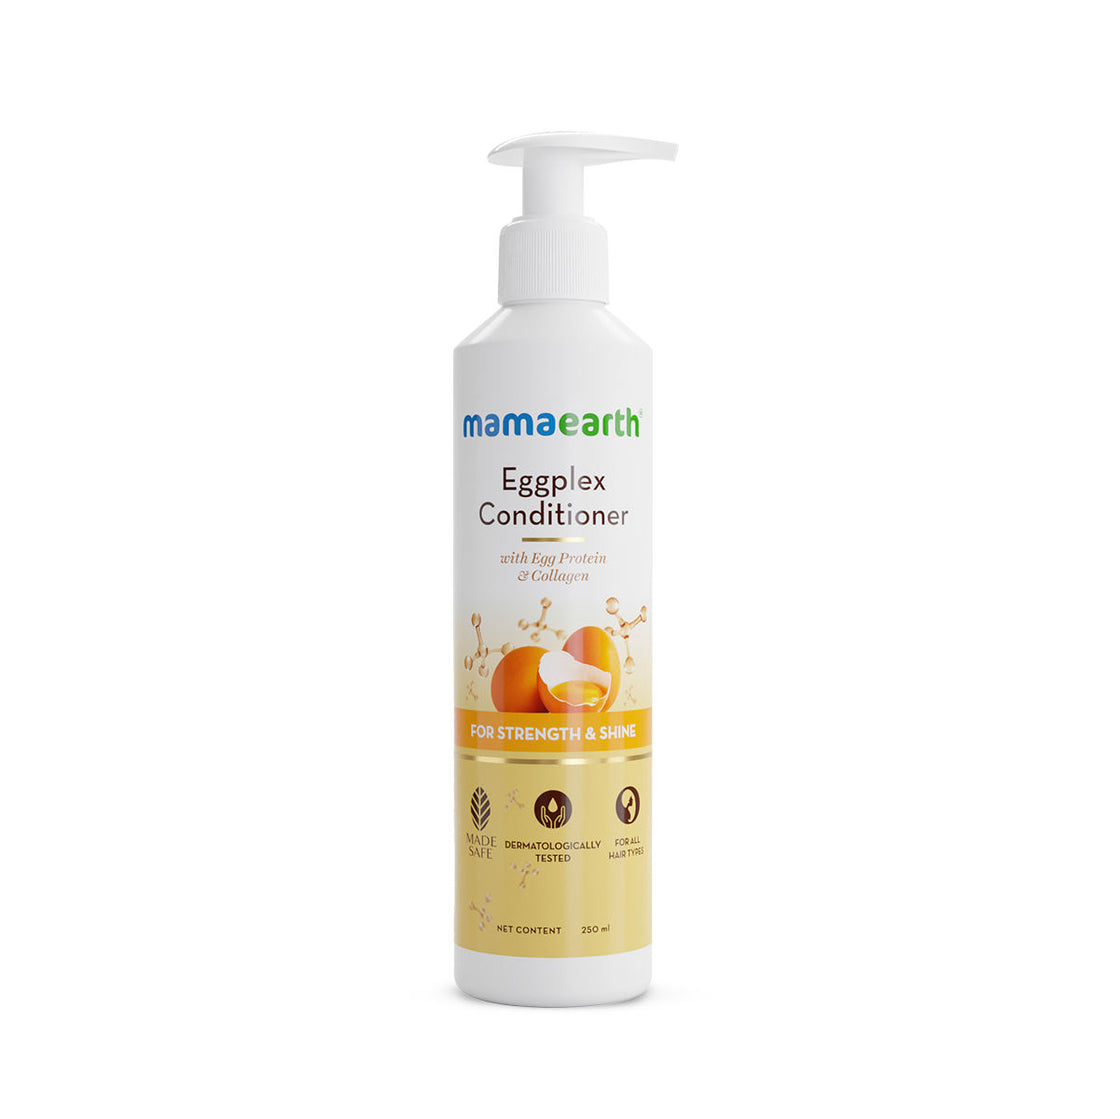 Mamaearth Eggplex Conditioner With Egg Protein & Collagen For Strength & Shine